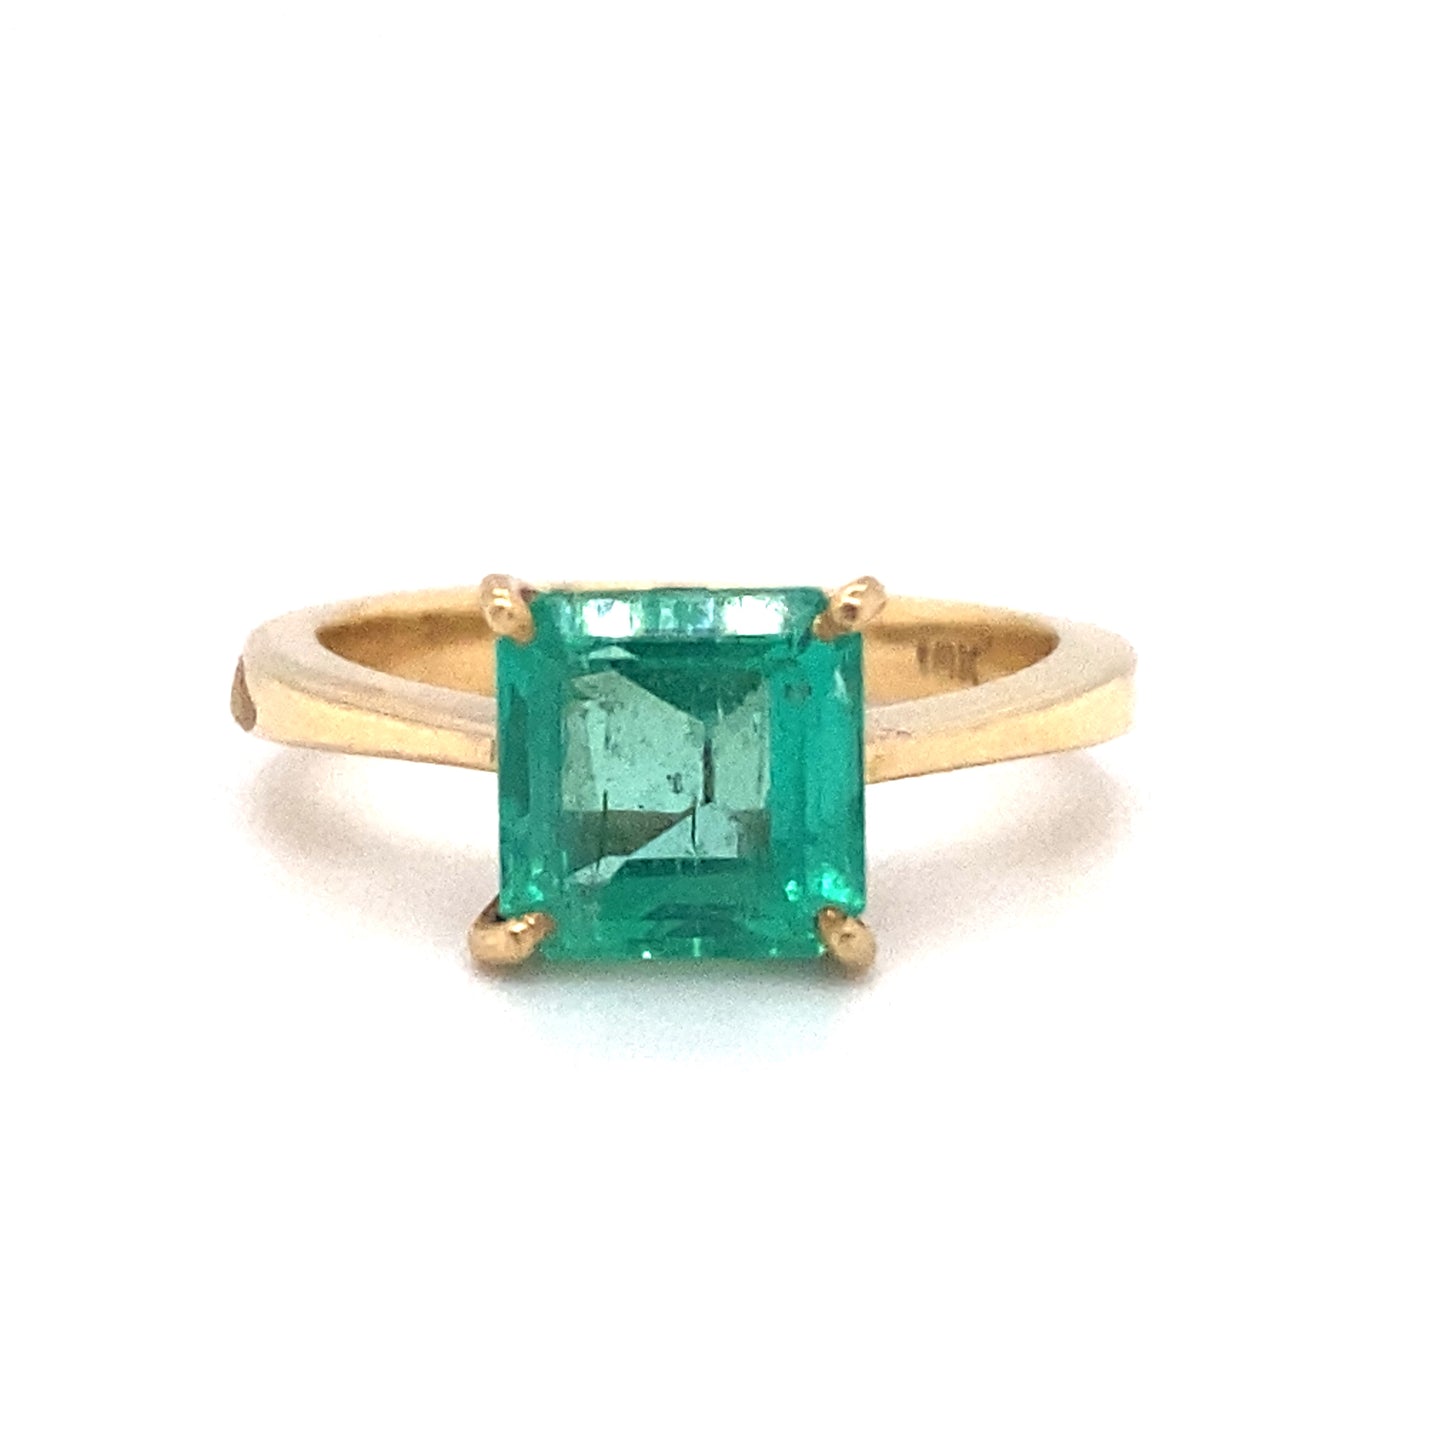 3.50ct Asscher Cut Colombian Emerald Solitaire Ring in 18K Gold